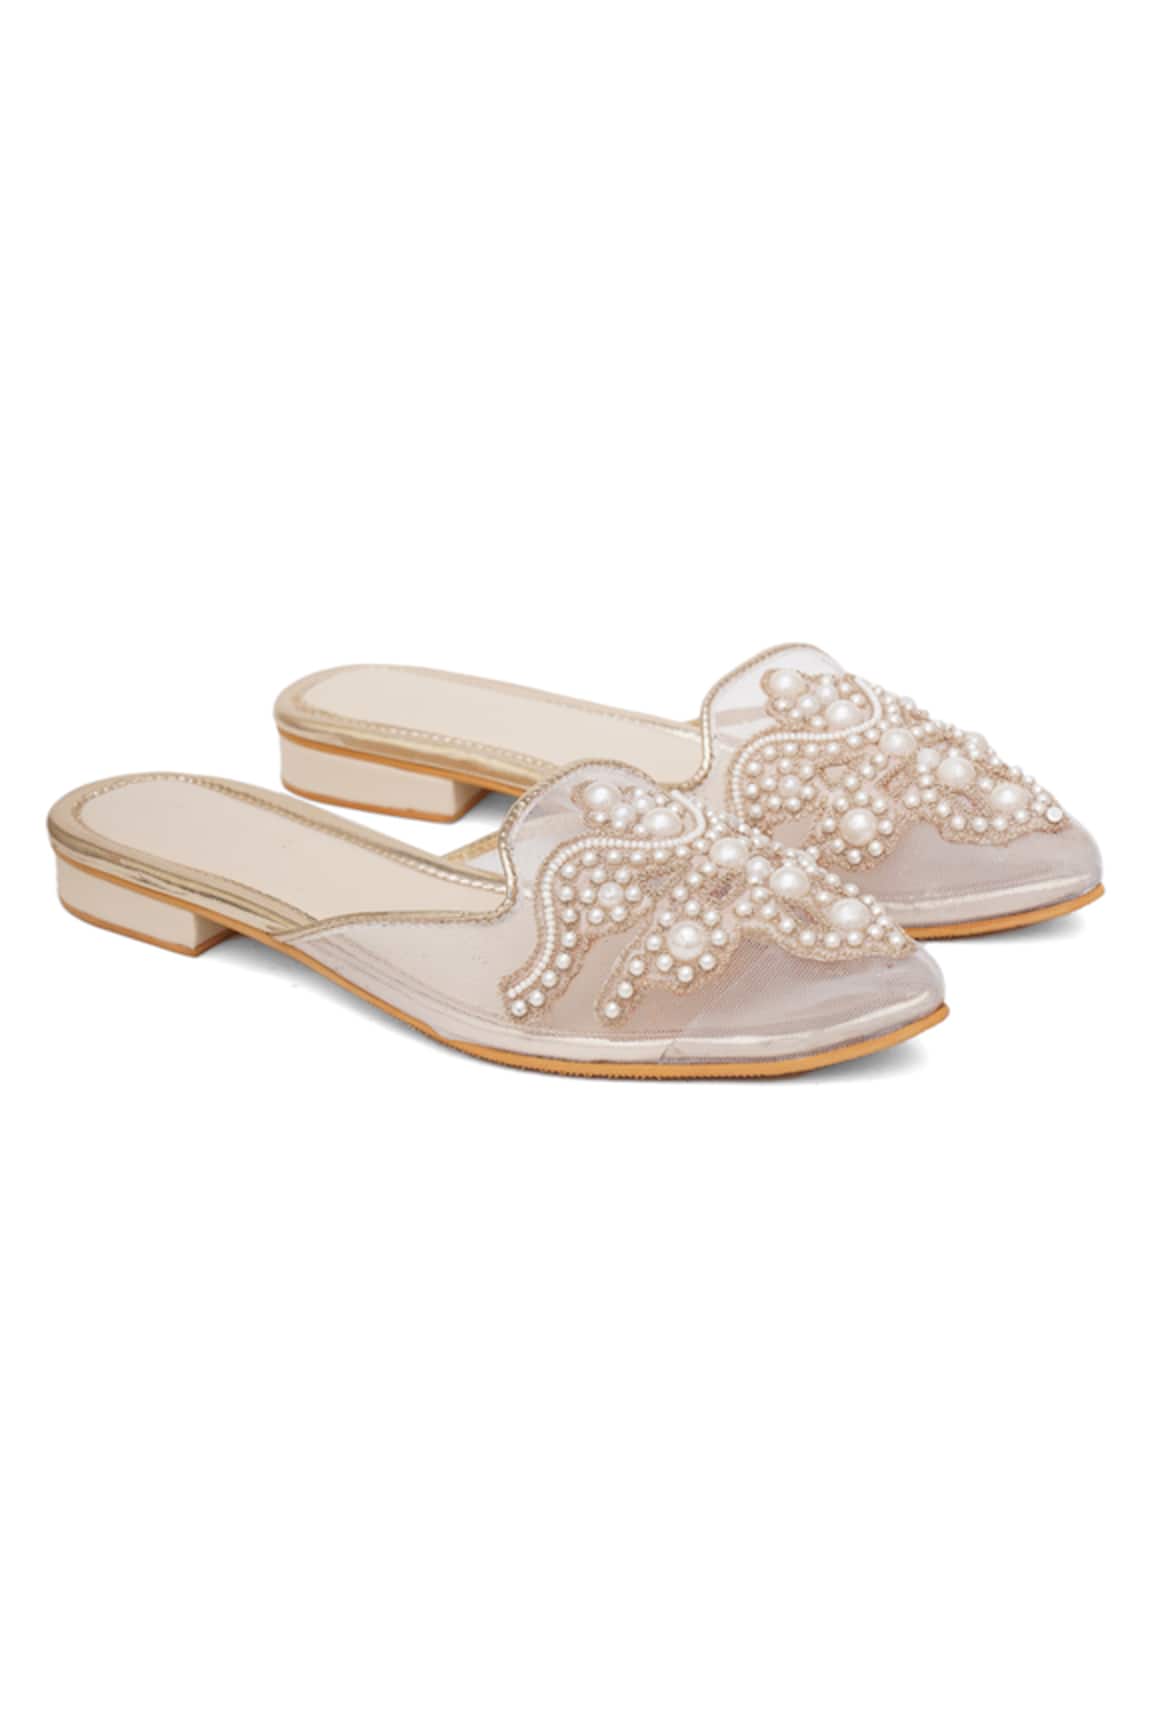 Sole House Marilyn Pearl Embroidered Mule Flats